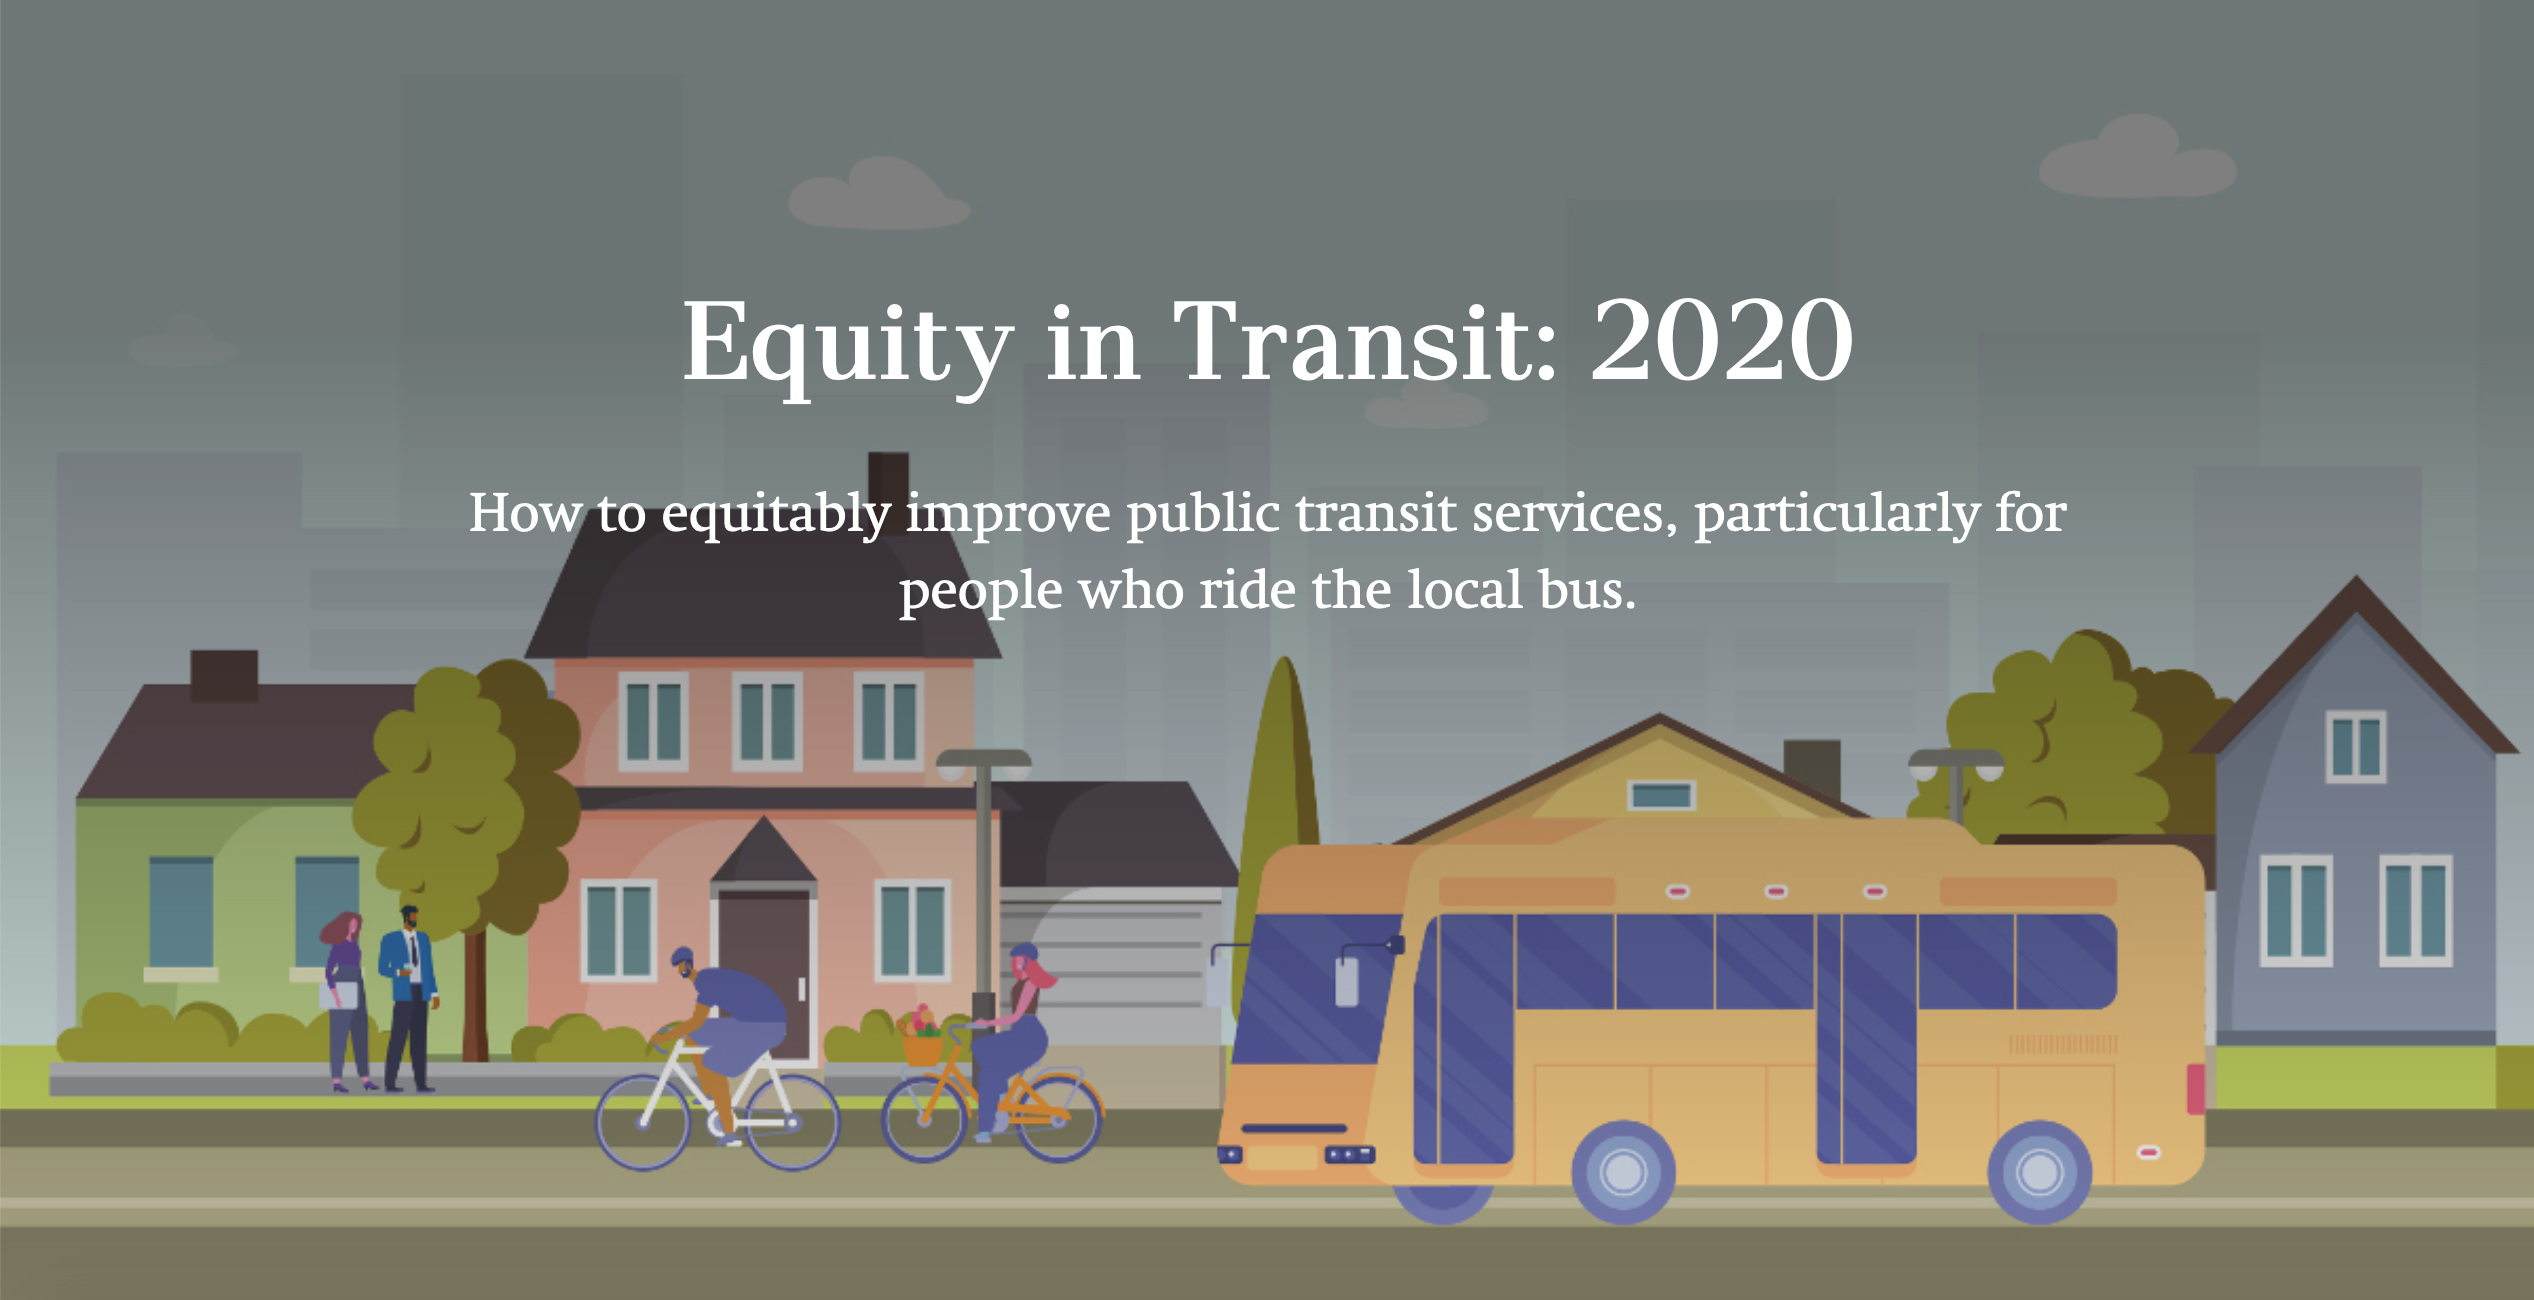 Equity in Transit 2020 featuring a graphic bus, riders, and homes in the background